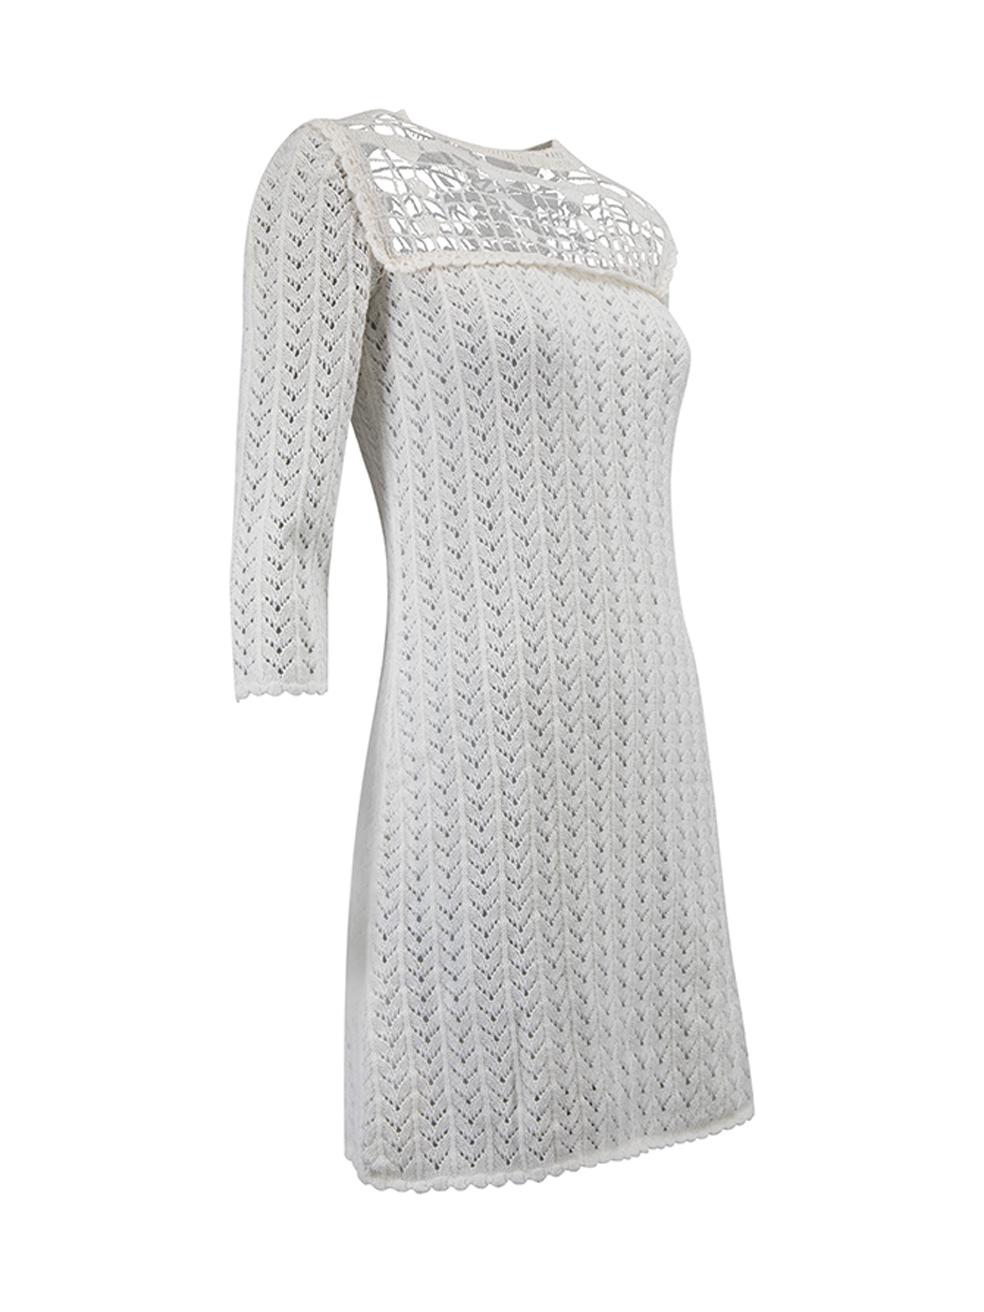 CONDITION is Never worn. No visible wear to dress is evident on this used Miu Miu designer resale item. Details White Cotton Mini dress Long sleeves Contract crochet panel on neckline Round neckline Back button closure Made in Italy Composition 100%